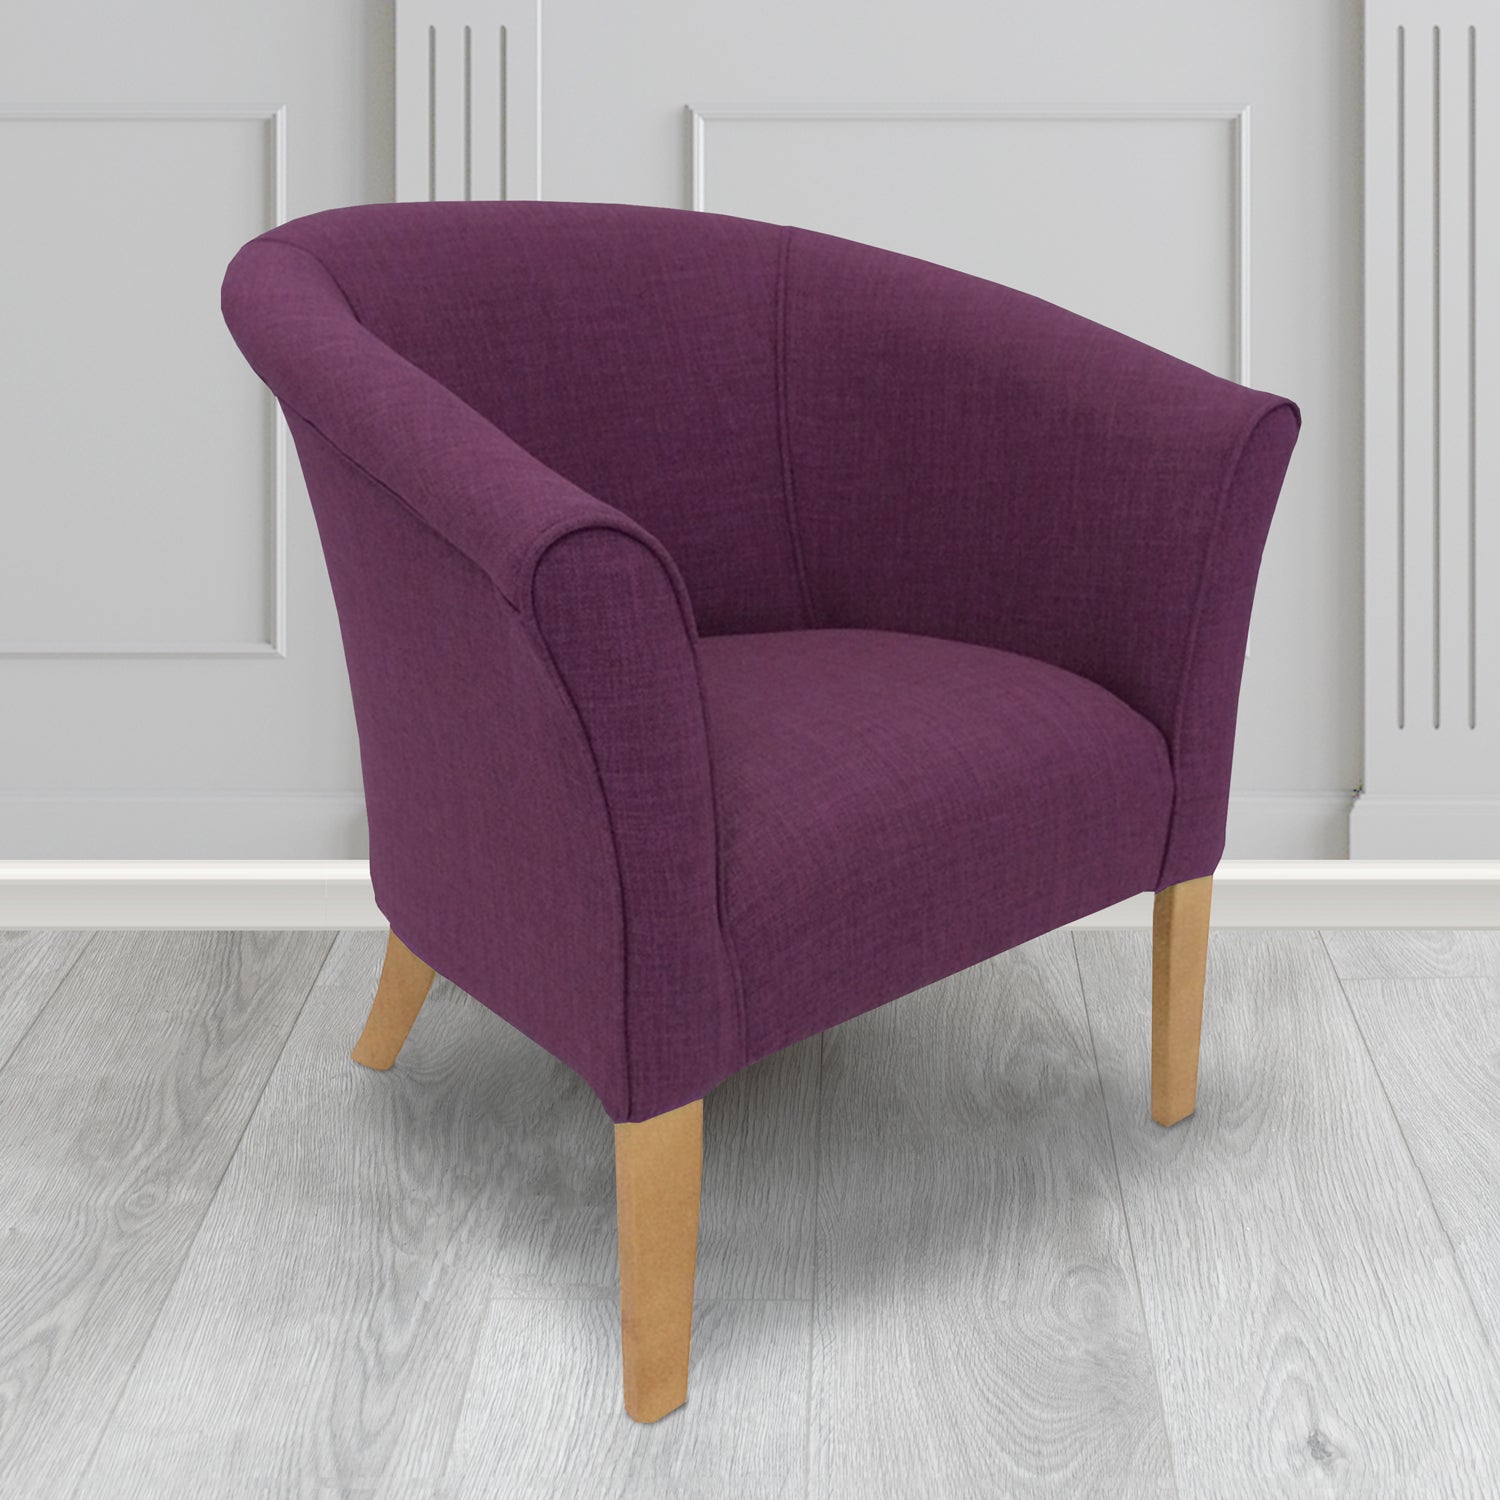 Quill Tub Chair in Linetta Purple Crib 5 Plain Fabric - Antimicrobial, Stain Resistant & Waterproof - The Tub Chair Shop